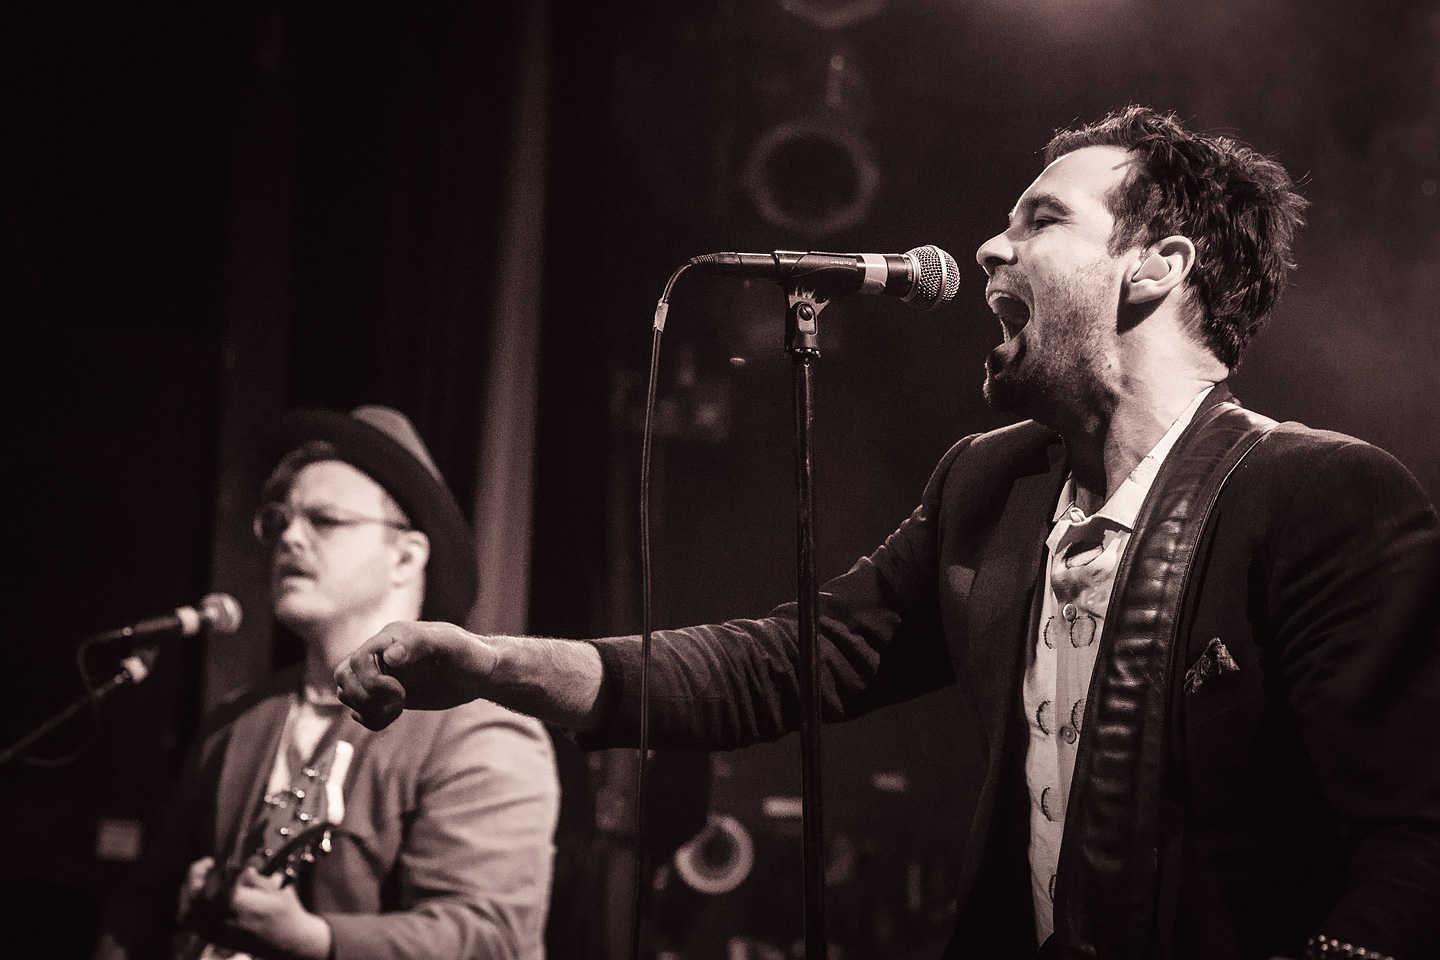 The Lone Bellow - Photos from Gothic Theatre Denver